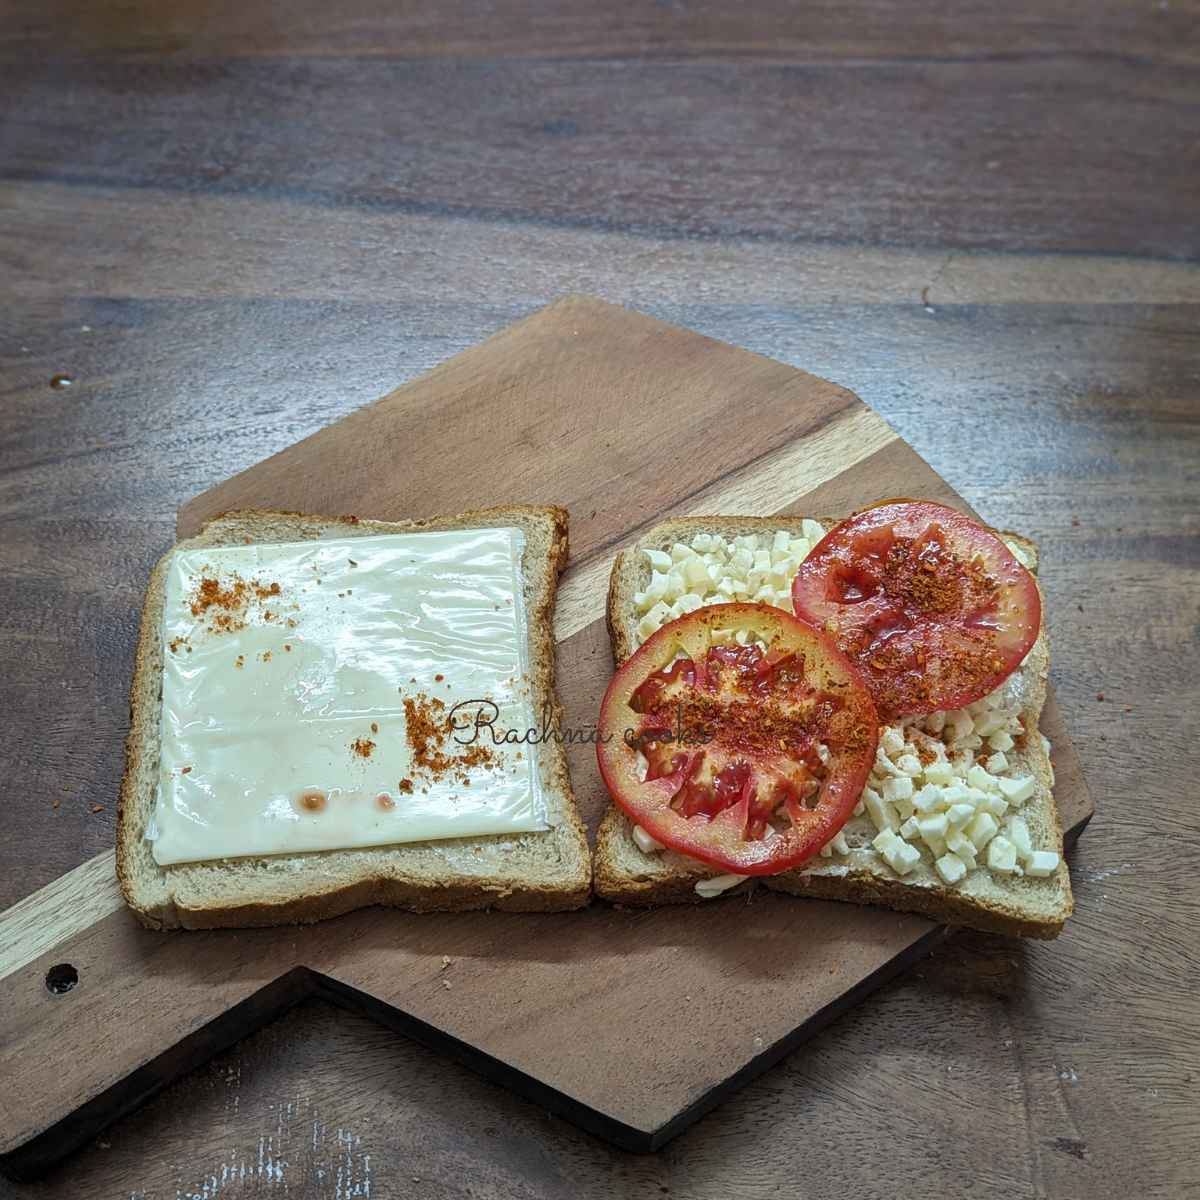 Bread slices with diced cheese, tomato slices and cheese slices.